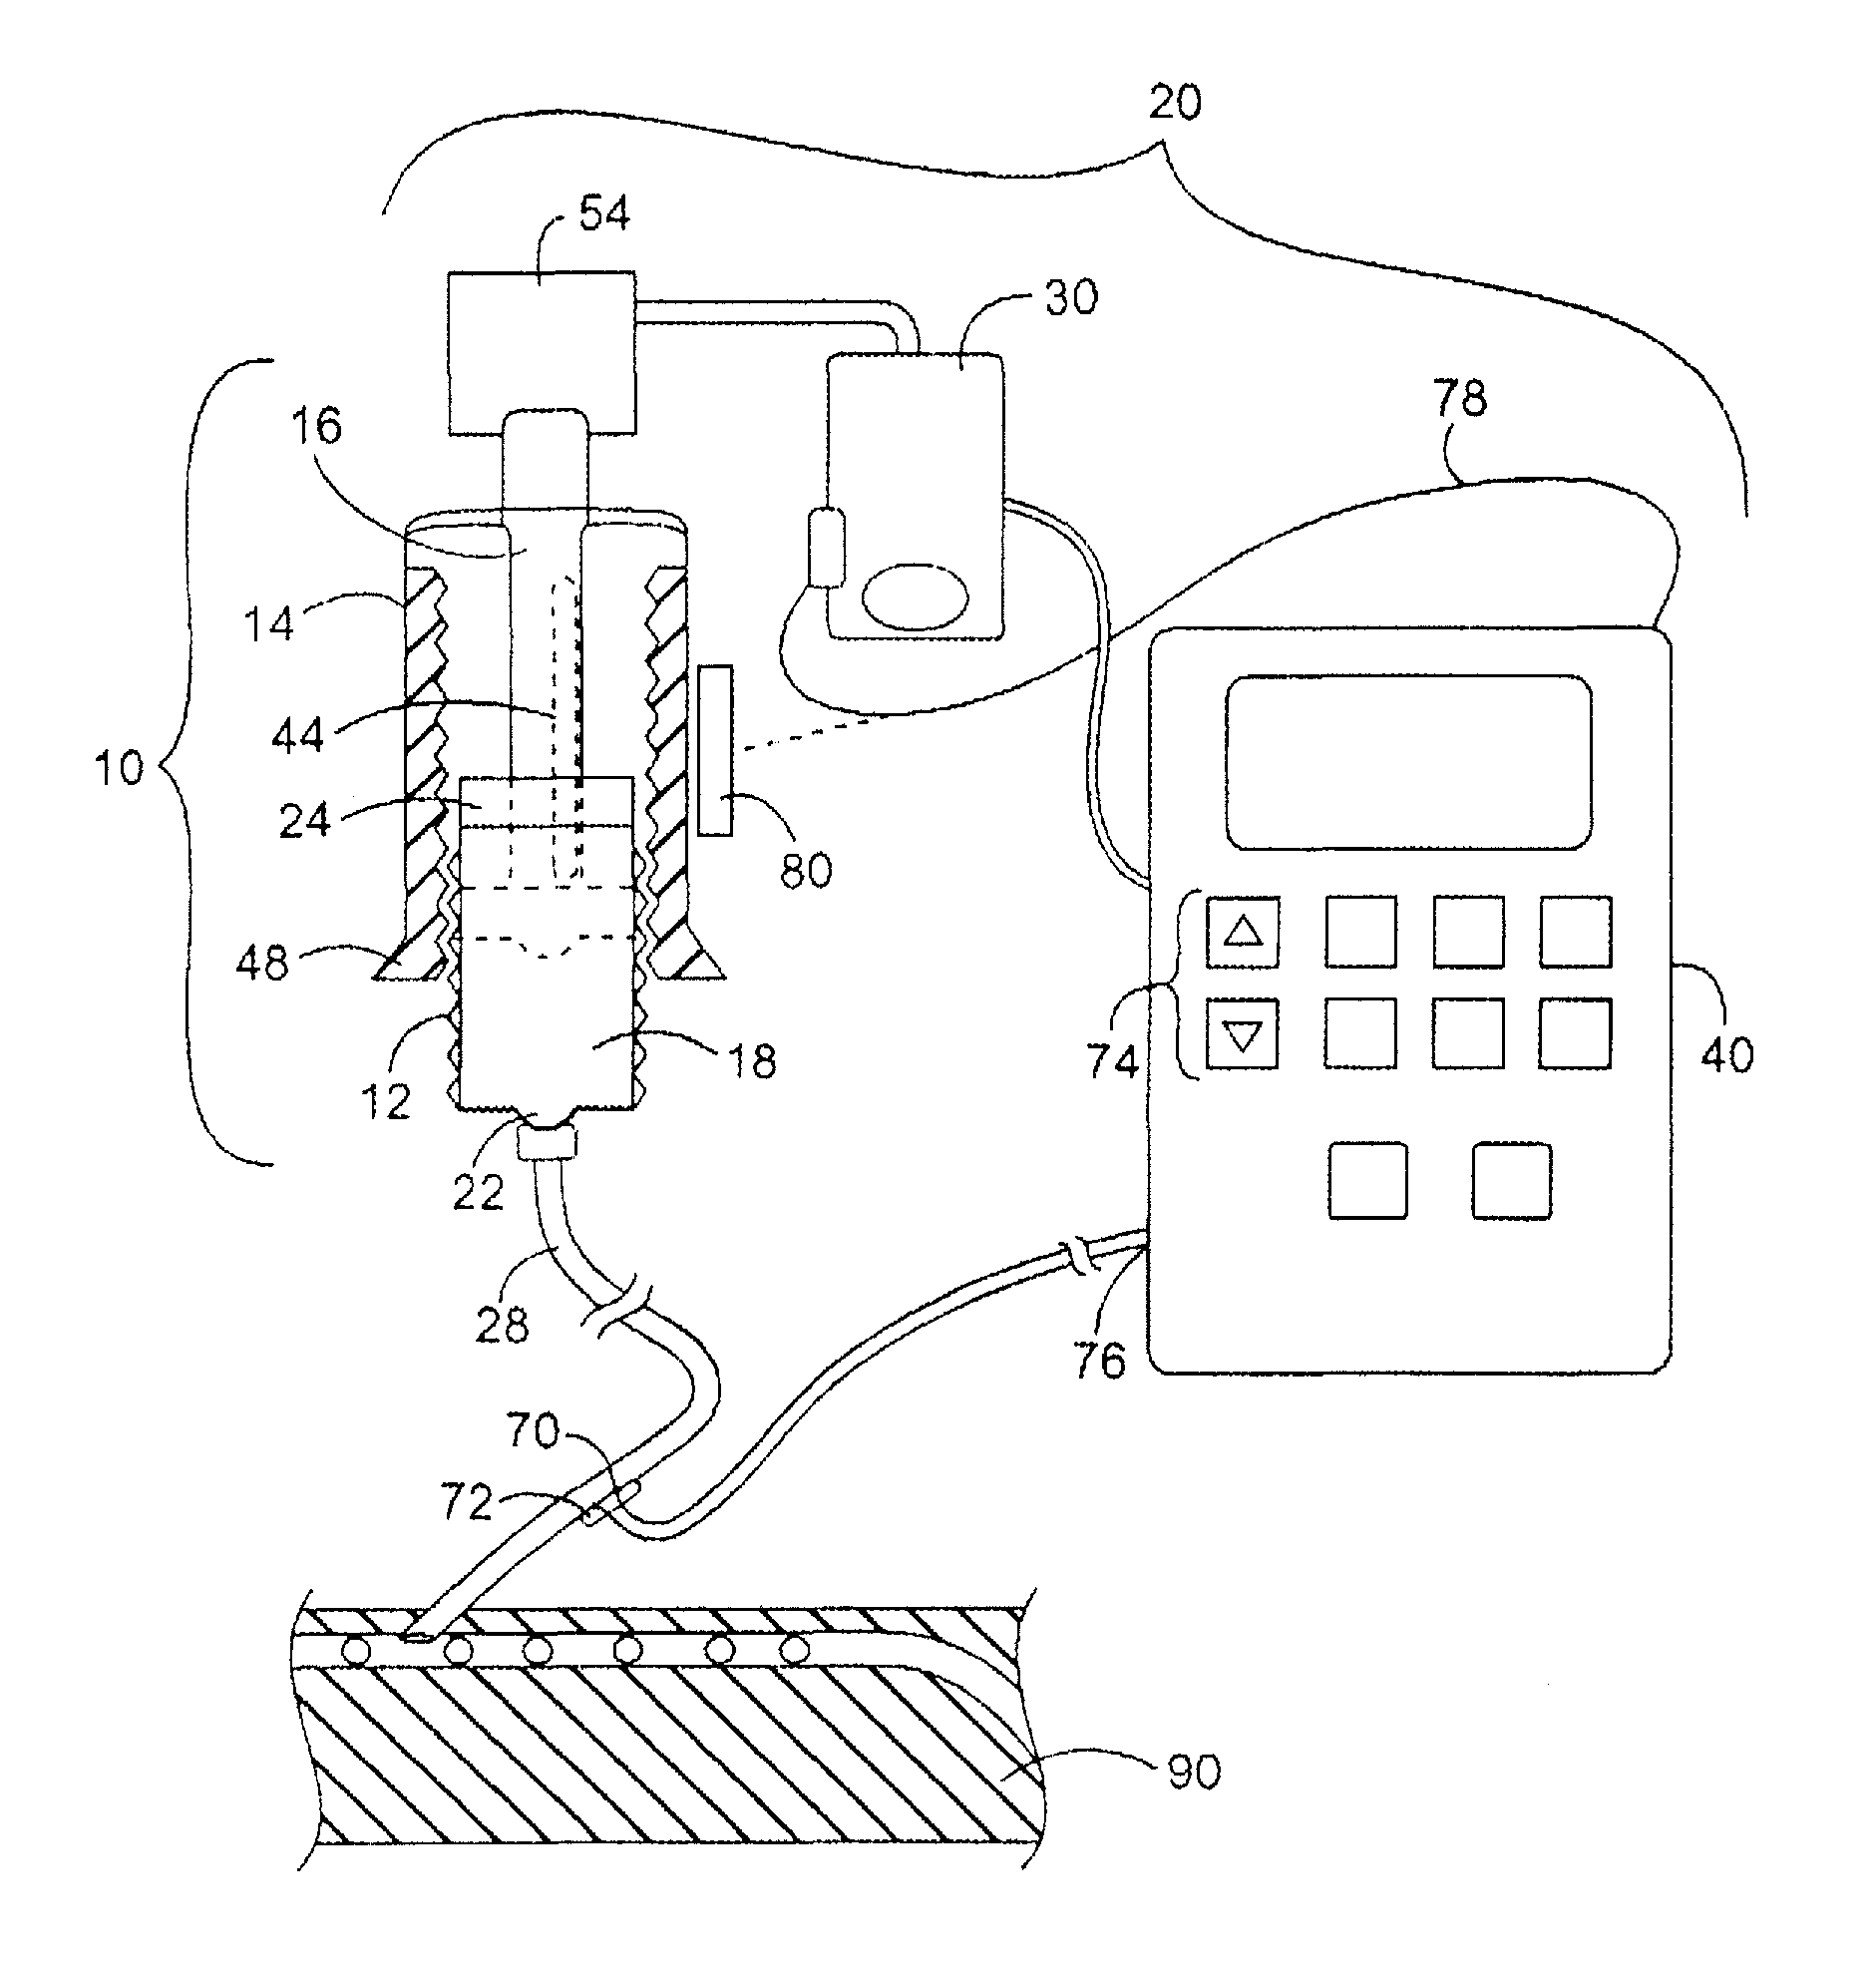 Medical infusion device producing adenosine triphosphate from carbohydrates